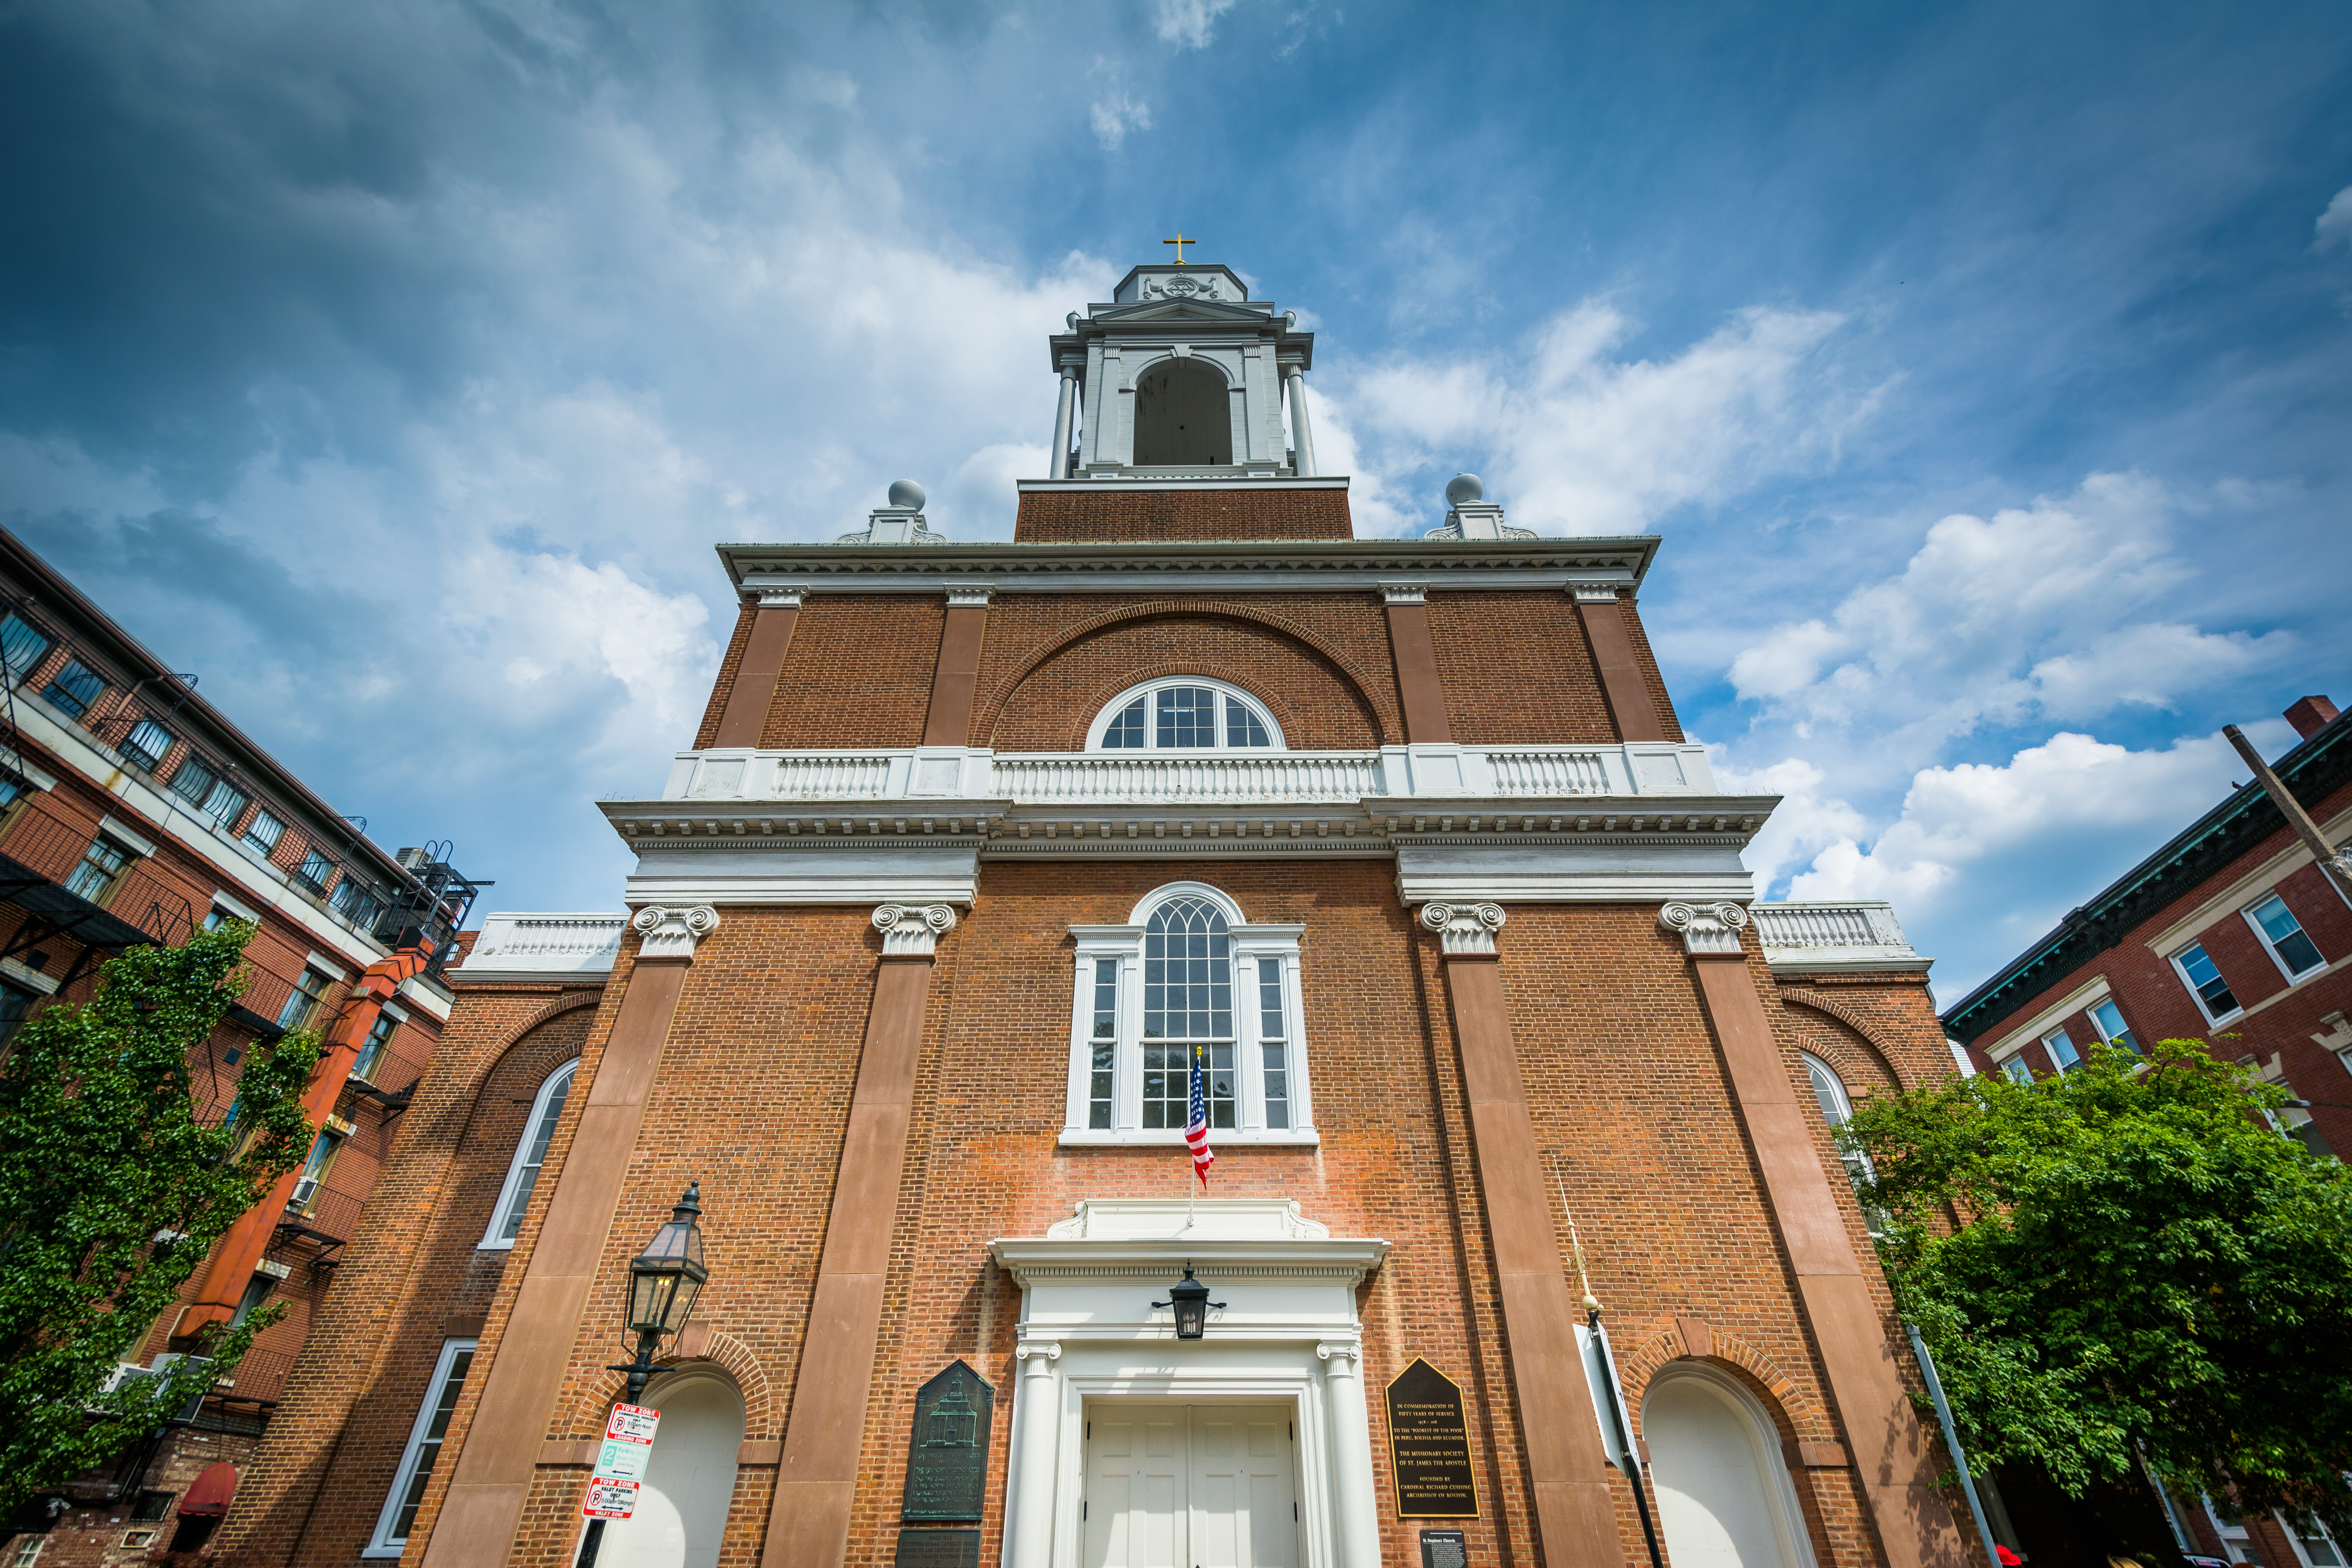 The exterior of three-story, thin, brick building ending in a thinner steeple.